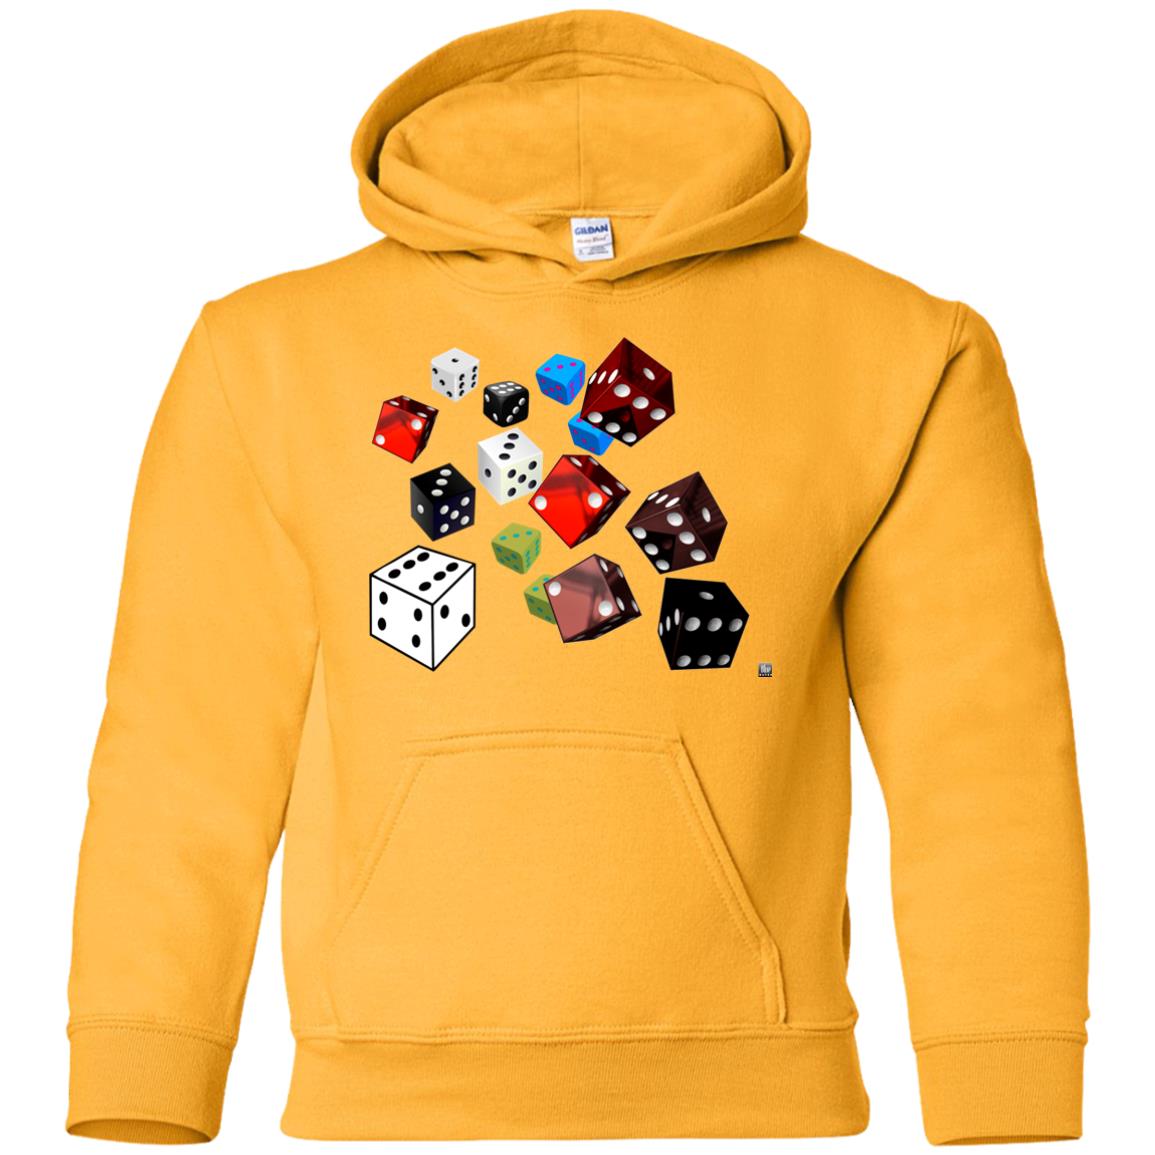 roll of the dice - Youth Hoodie